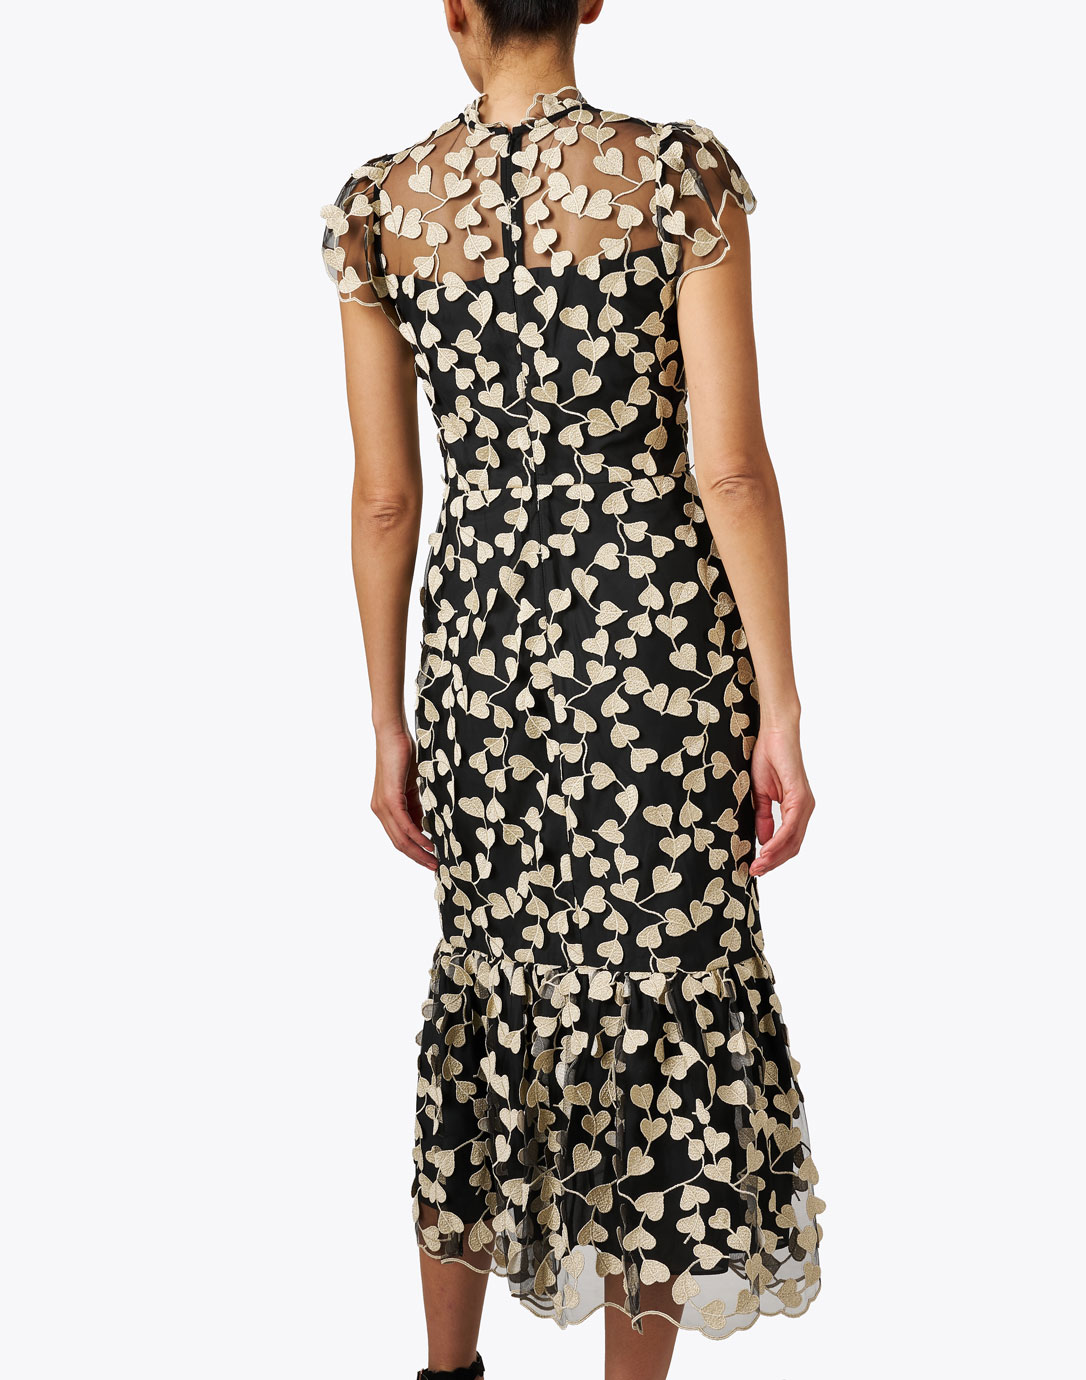 Liberty Black and Gold Embroidered Dress | Shoshanna